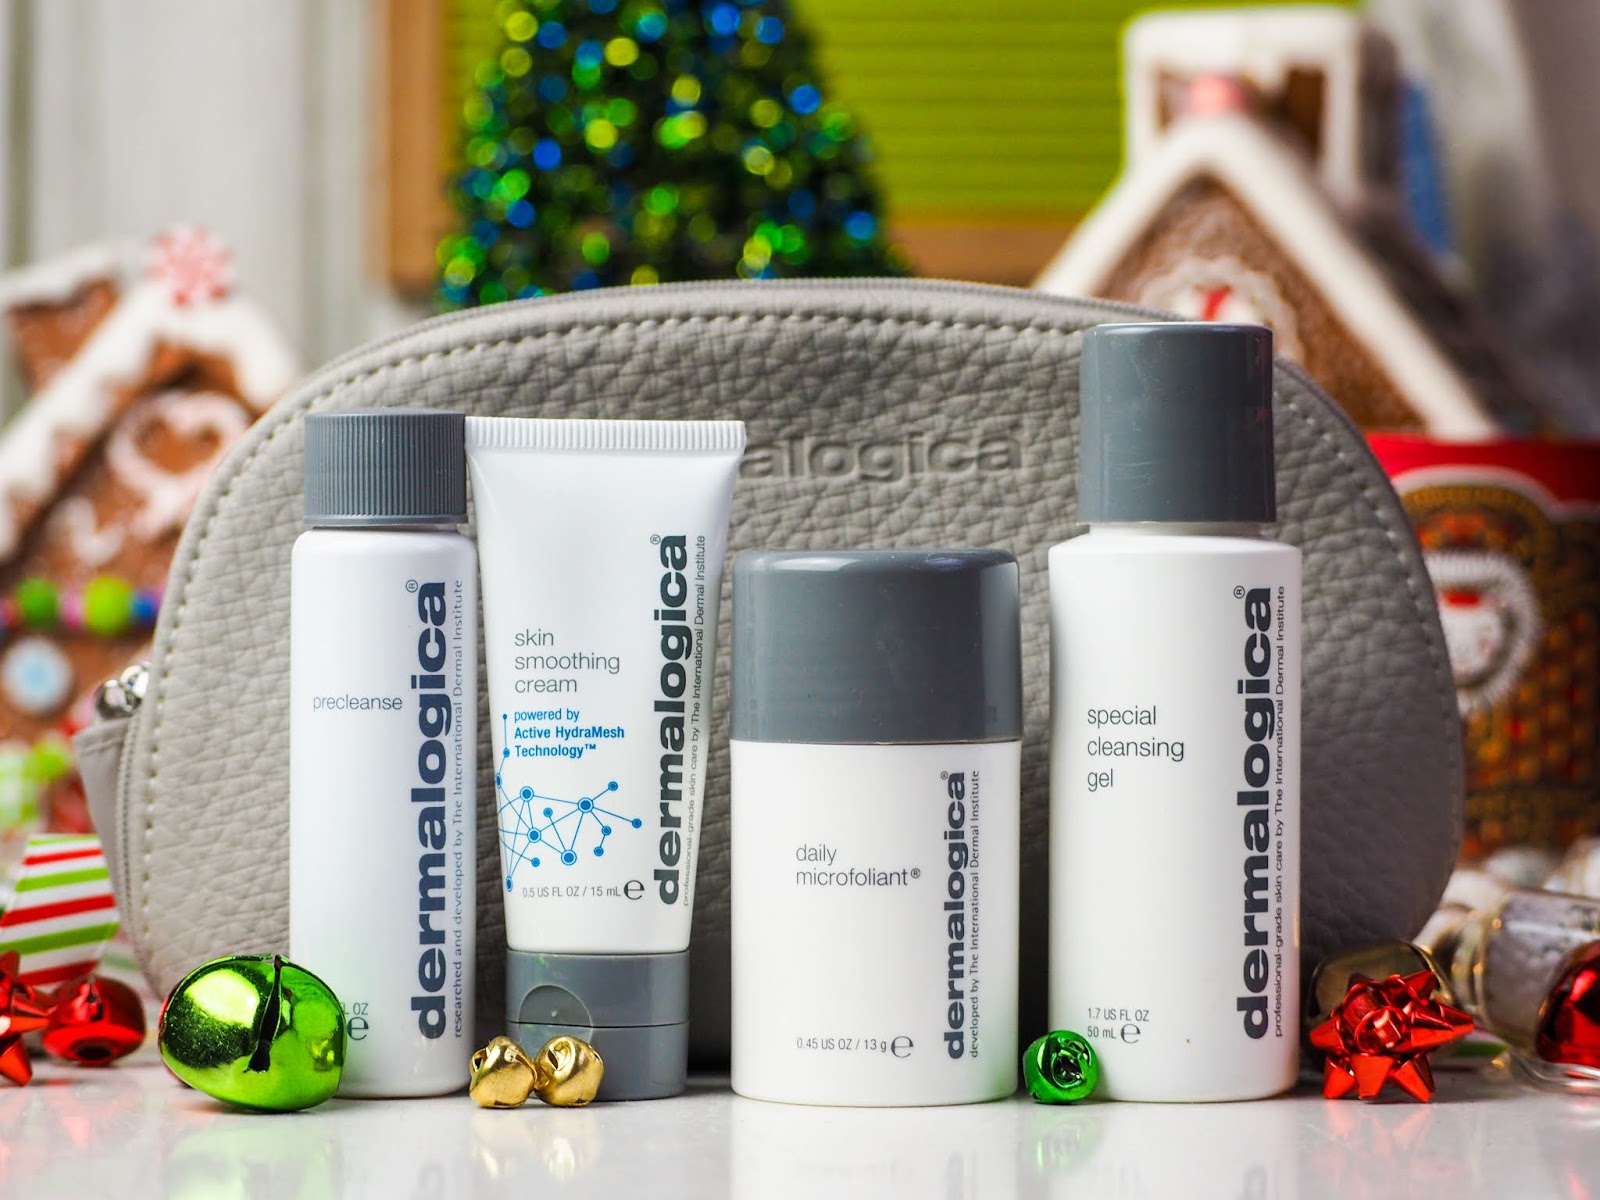 Christmas Gifting With Dermalogica*, Barrier Defense Booster*, Rapid Reveal Peel*, Nightly Lip Treatment*, Redness Relief Essence*, Precleanse Balm*, Intensive Moisture Cleanser*, Intensive Moisture Balance* Skin Smoothing Cream*, Daily Microfoliant*, Special Cleansing Gel* Review